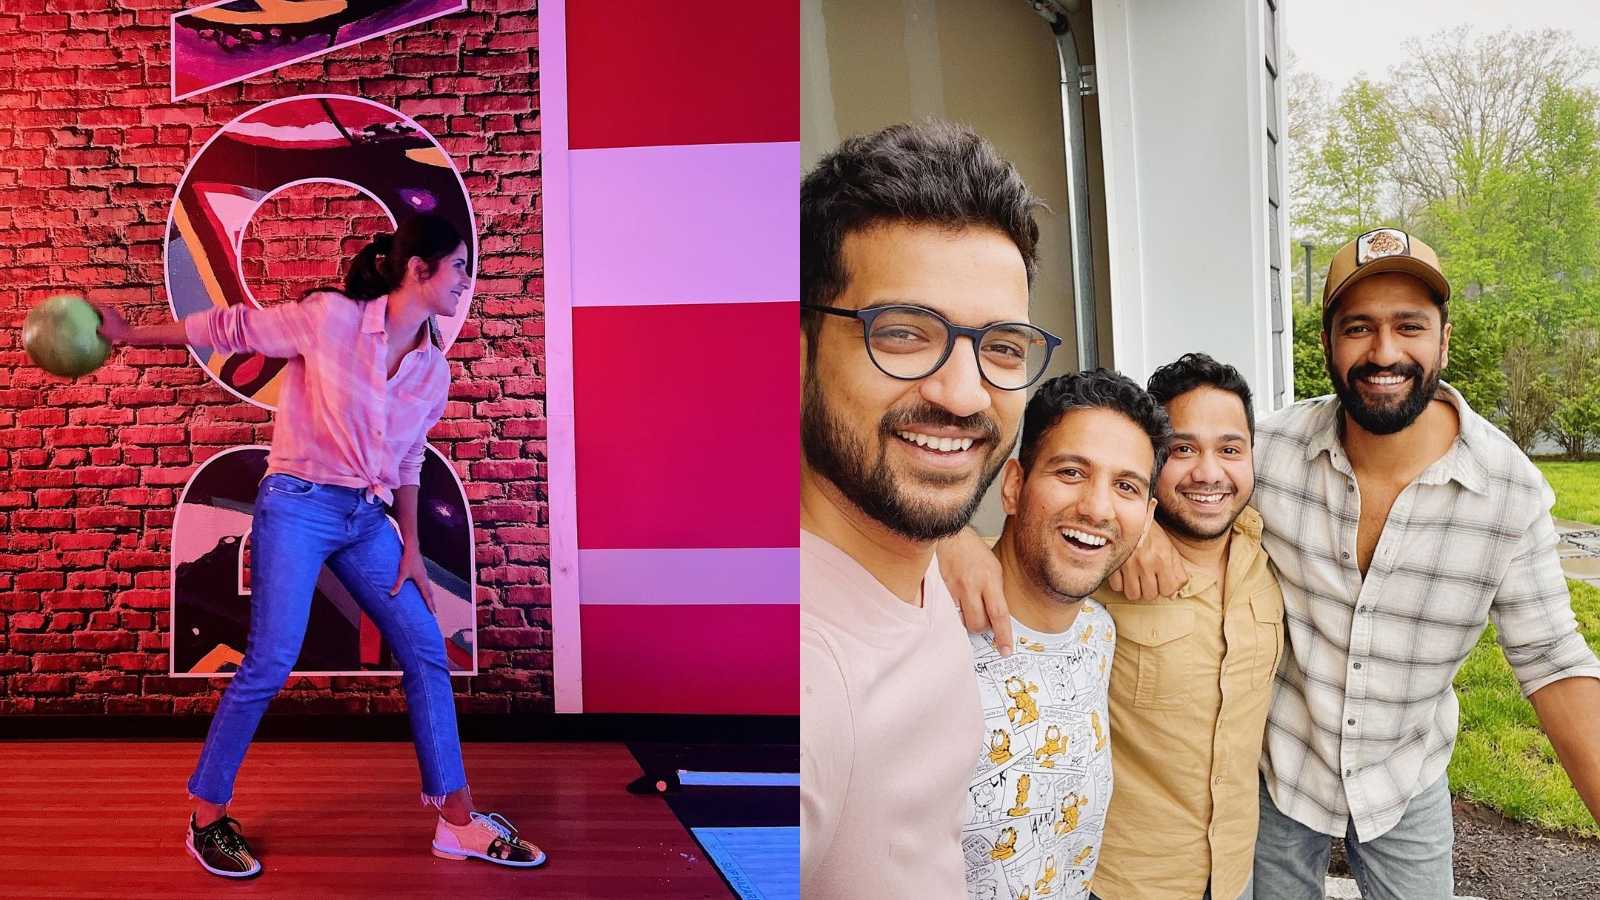 Vicky Kaushal catches up with his college friends, while Katrina Kaif enjoys a 'Very American Saturday'